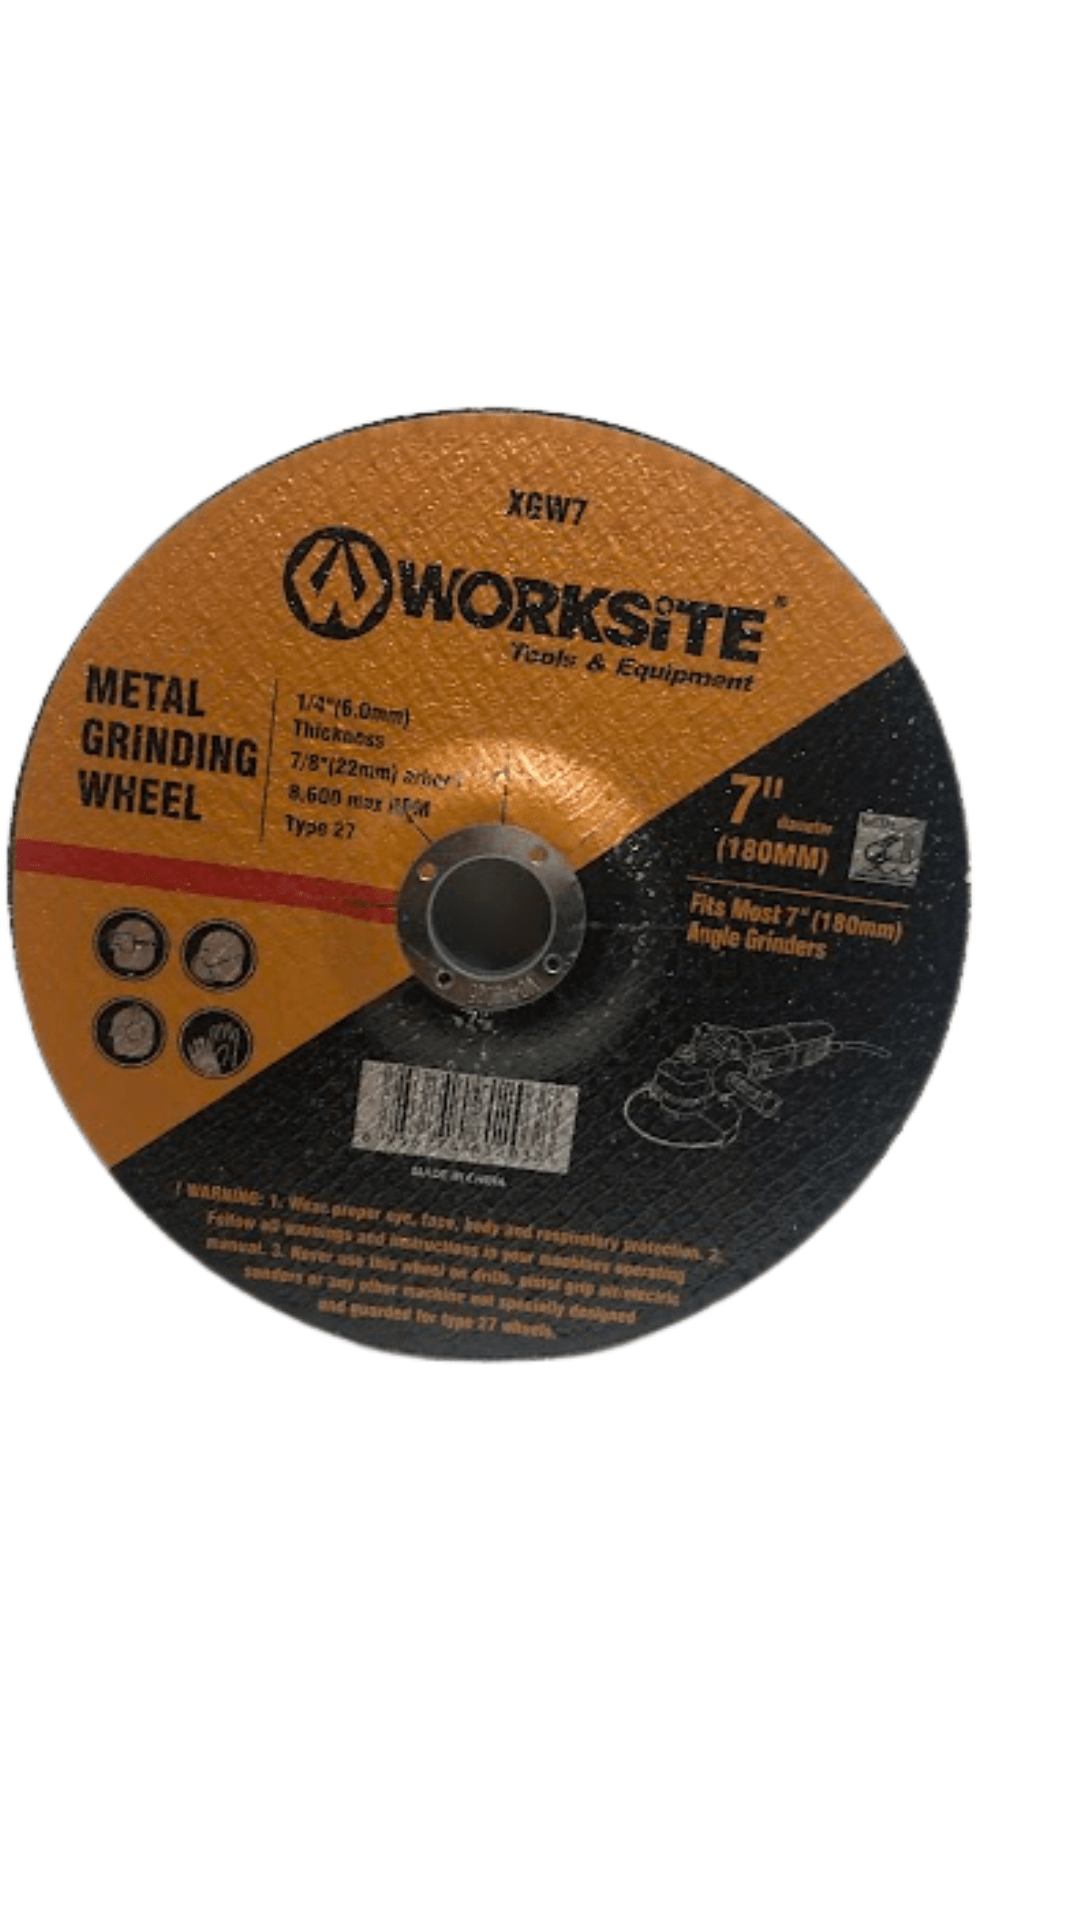 Worksite 7 Inch (180 Millimeter) Diamond Grinding Wheel. Suitable For Most Electric Grinders Air Cut Off Tool And Electric Cut Off Tool -Our Cutting Wheels Are Ideal For Cutting Iron, Steel, Stainless Steel, Fiberglass  – XGW7